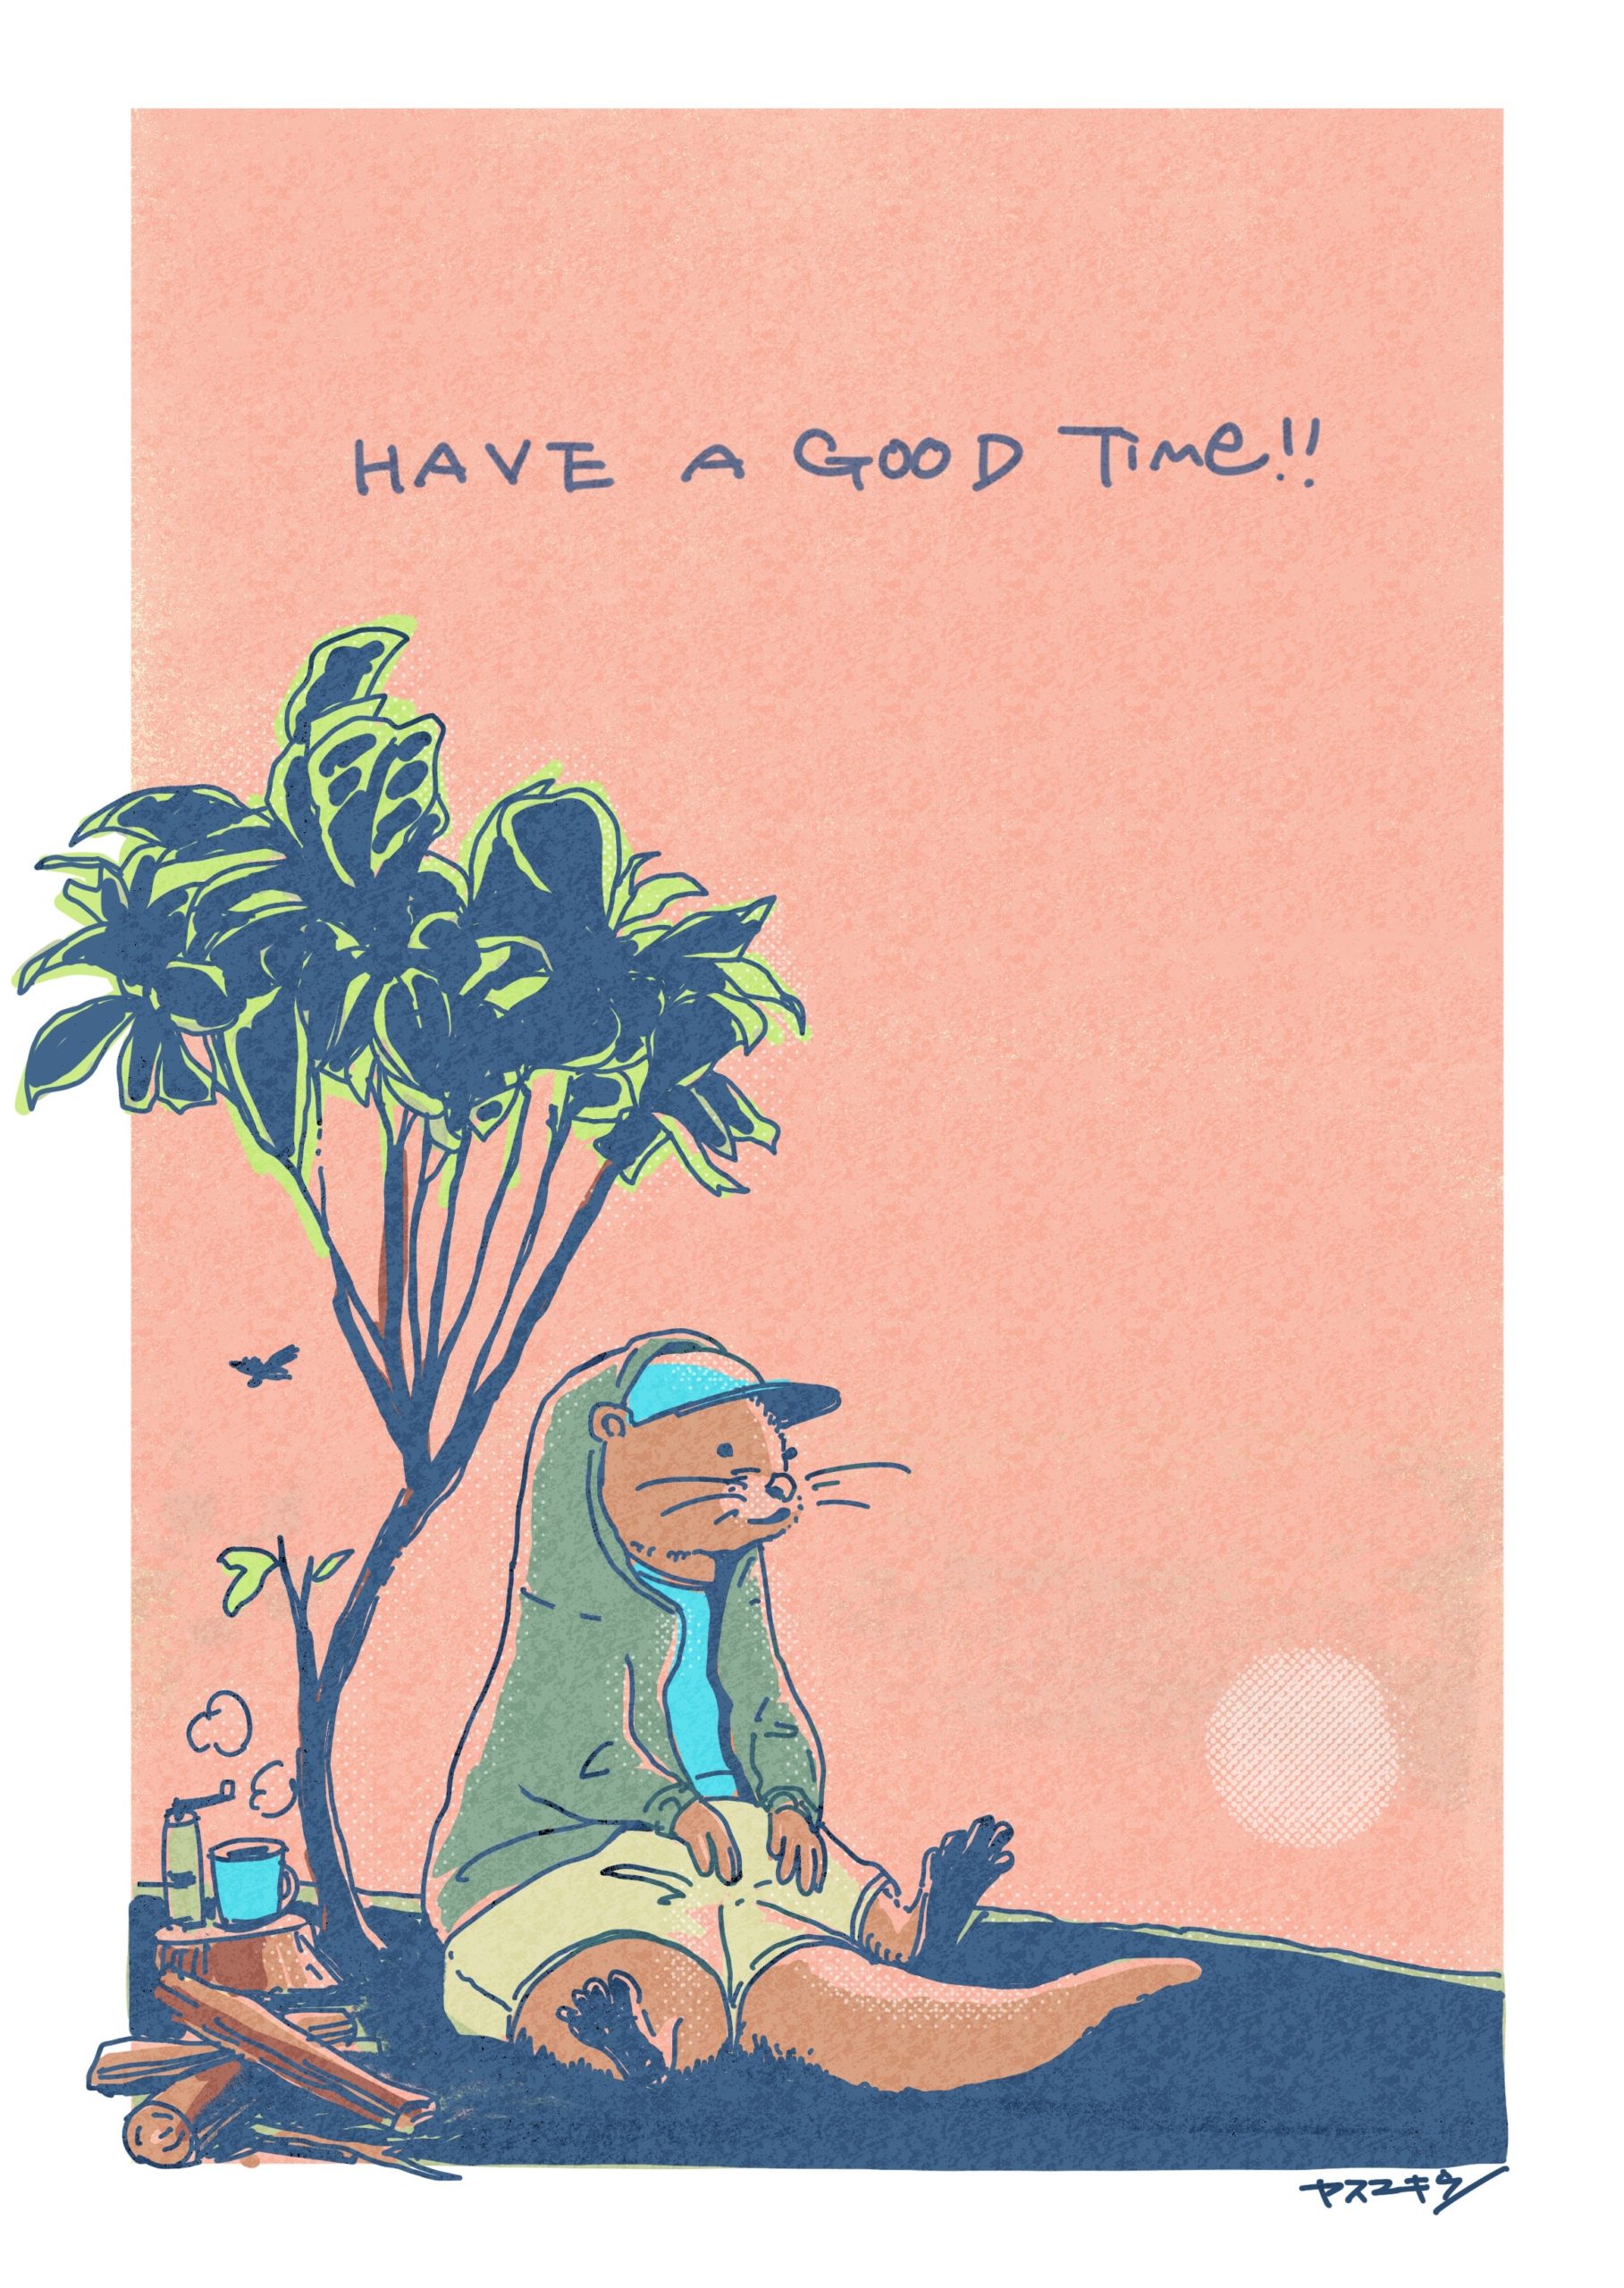 HAVE A GGOD TIME-TREE